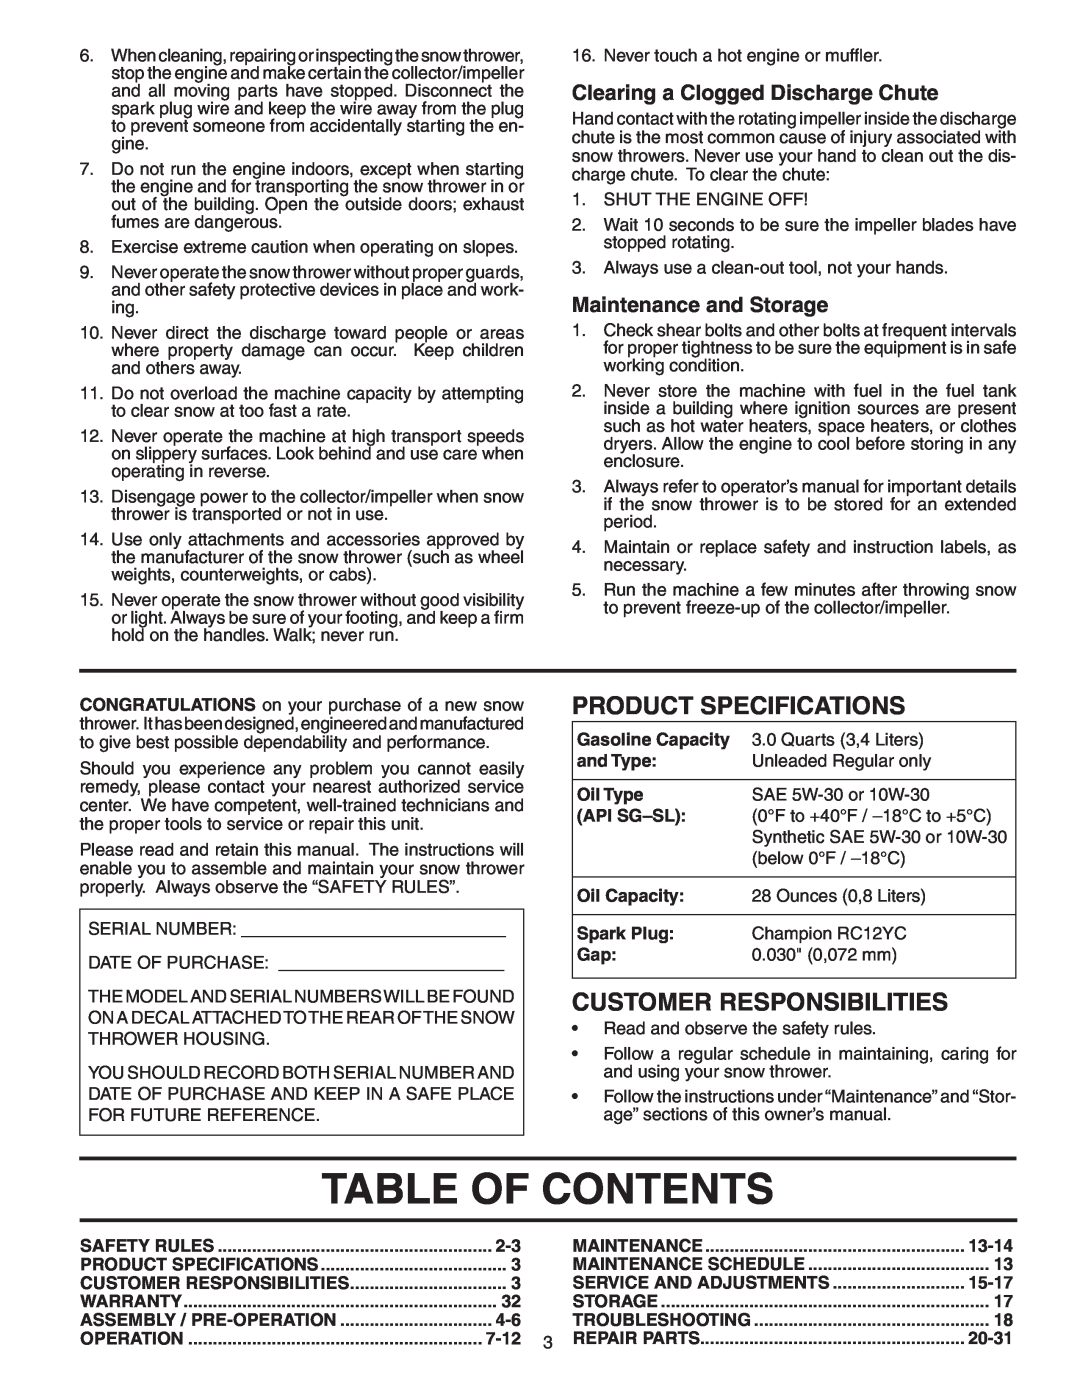 Poulan 403919 Table Of Contents, Clearing a Clogged Discharge Chute, Maintenance and Storage, Product Specifications, 7-12 